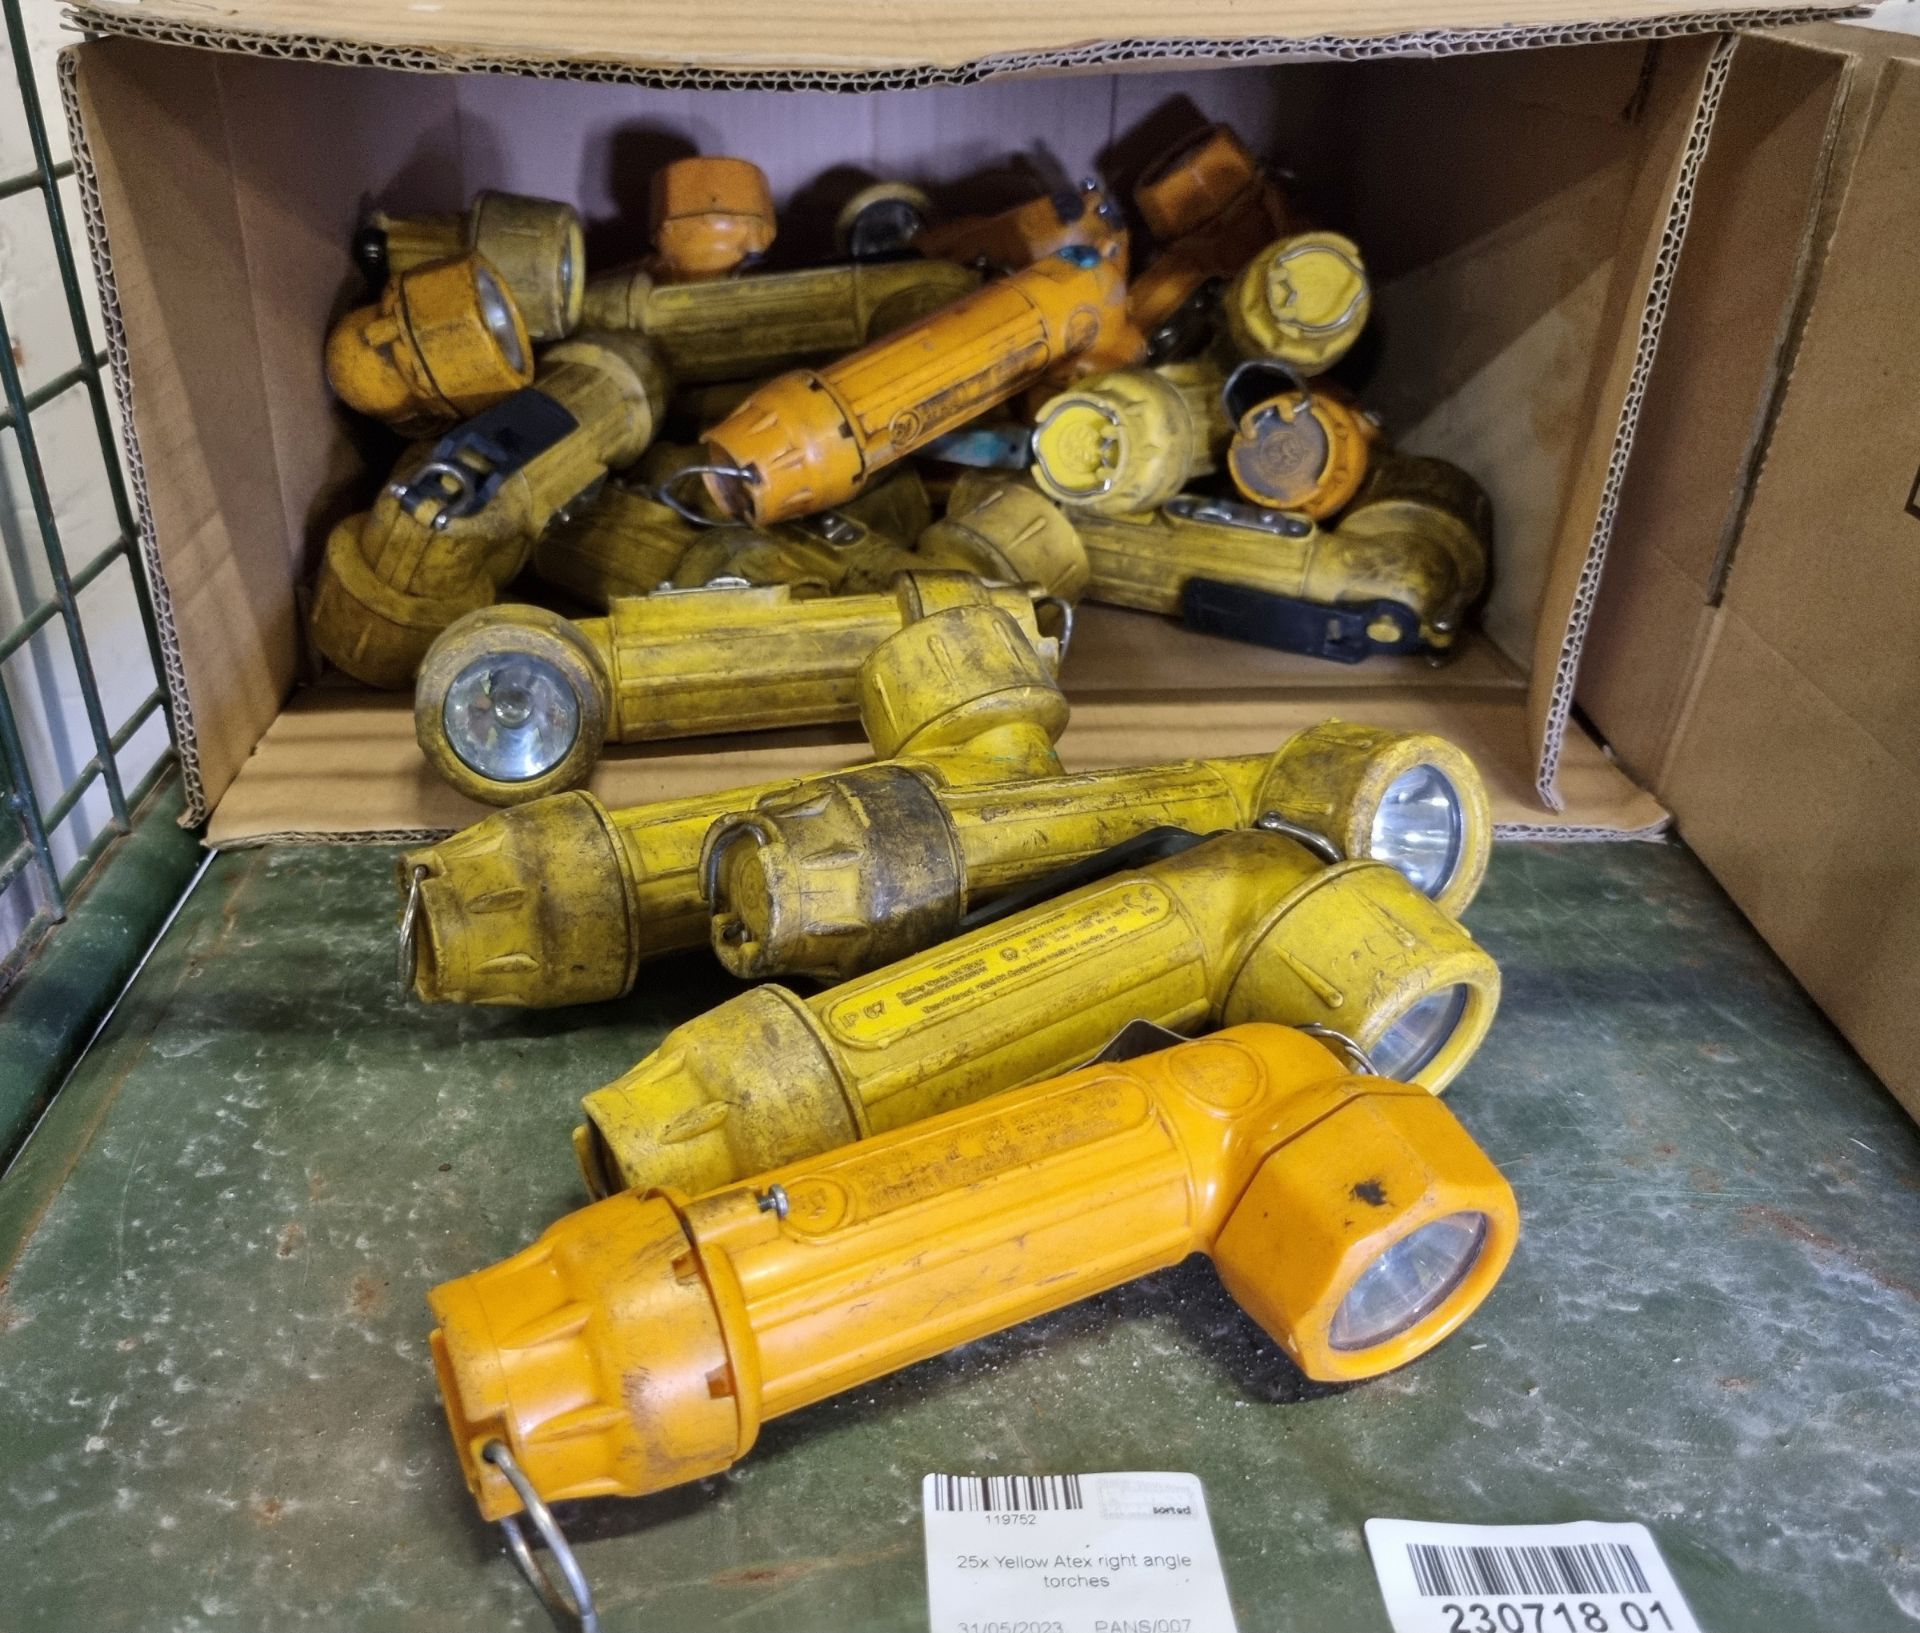 25x Yellow Atex right angle torches - Image 3 of 5